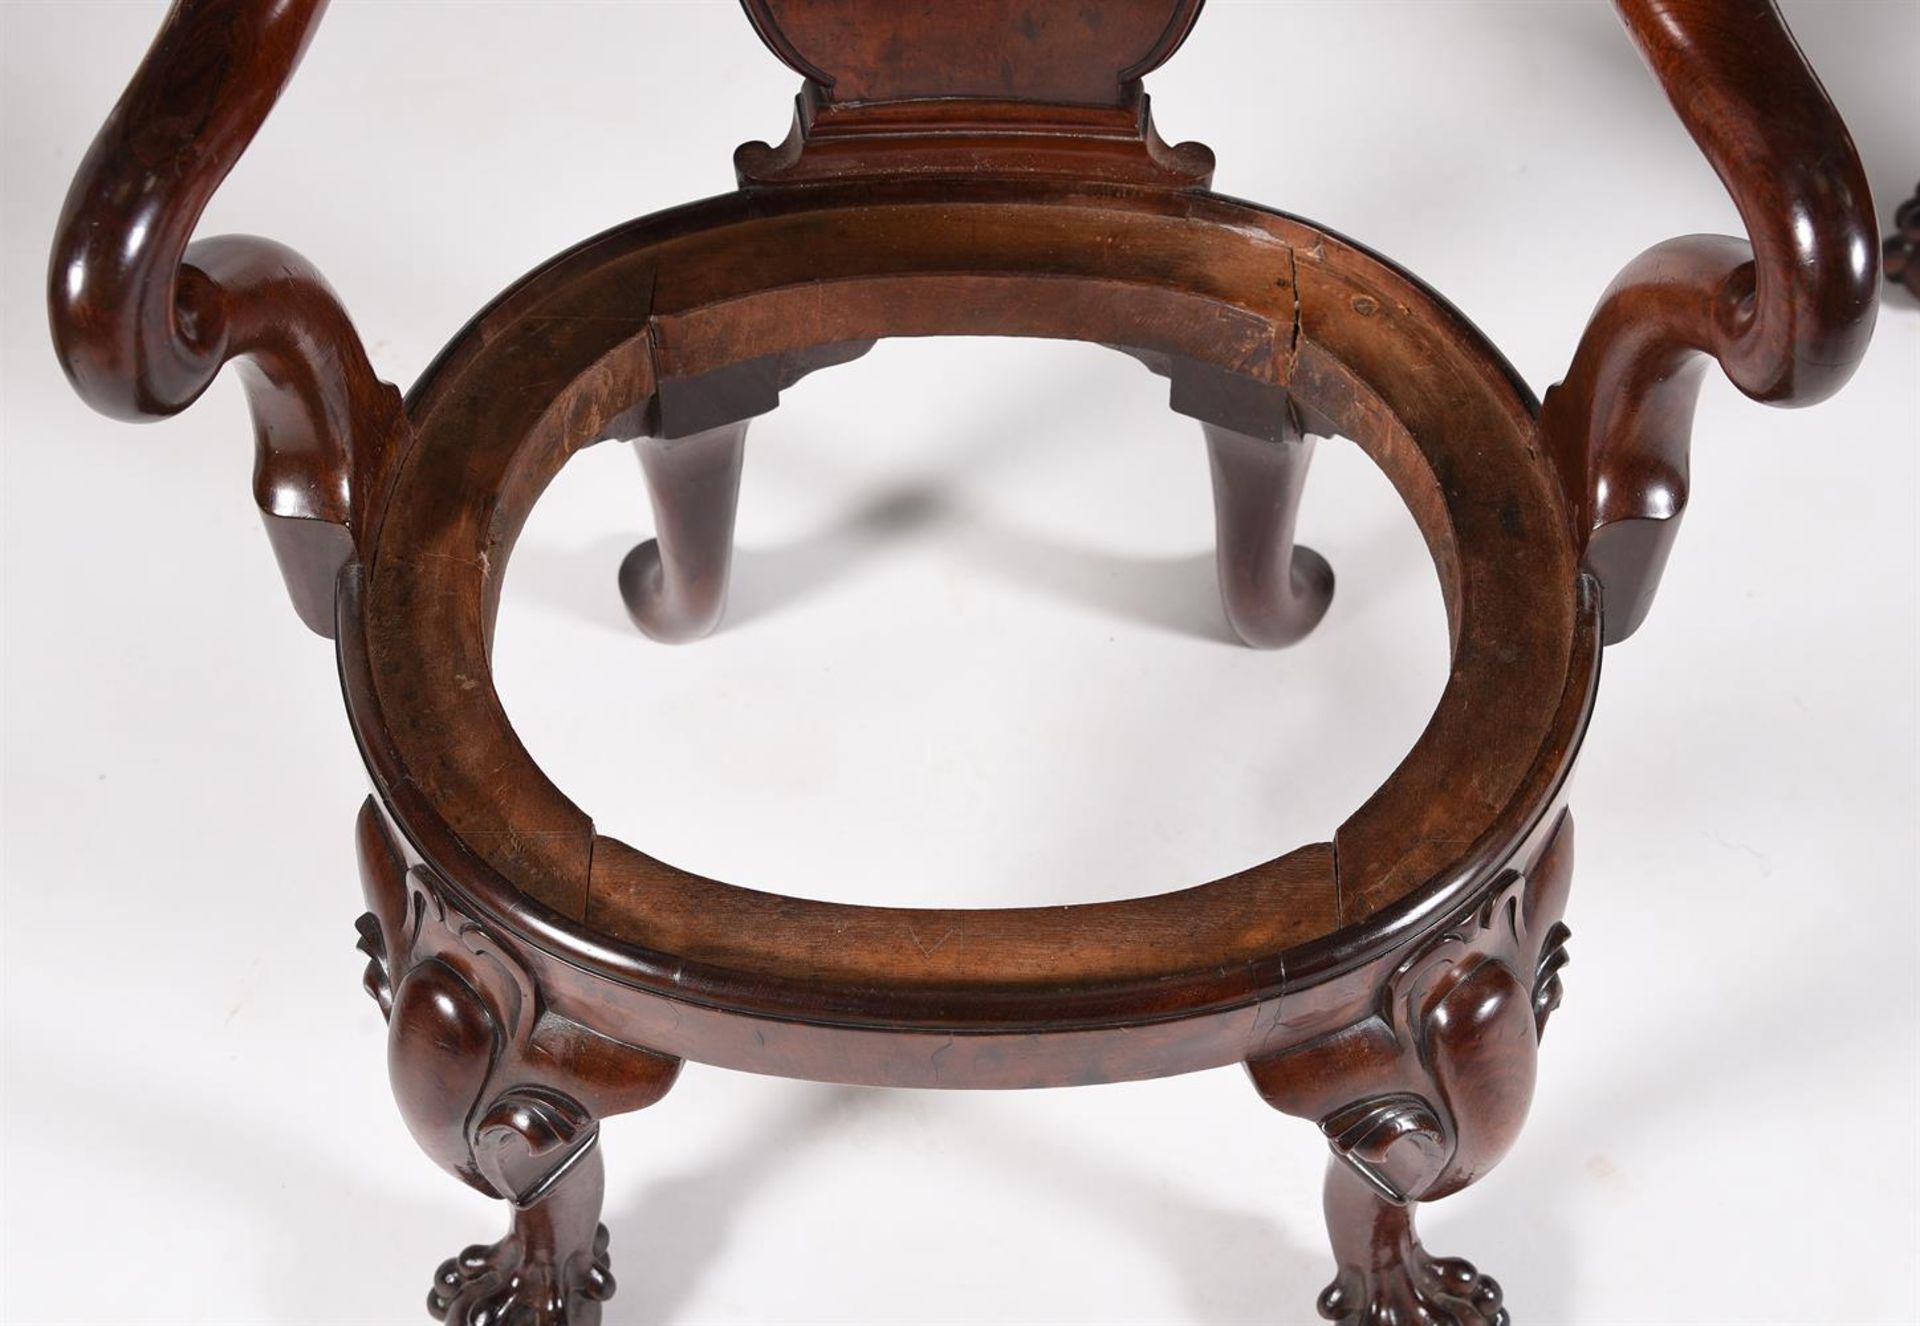 A PAIR OF WILLIAM IV MAHOGANY AND 'PLUM PUDDING' MAHOGANY ARMCHAIRS, ATTRIBUTED TO GILLOWS - Image 6 of 6